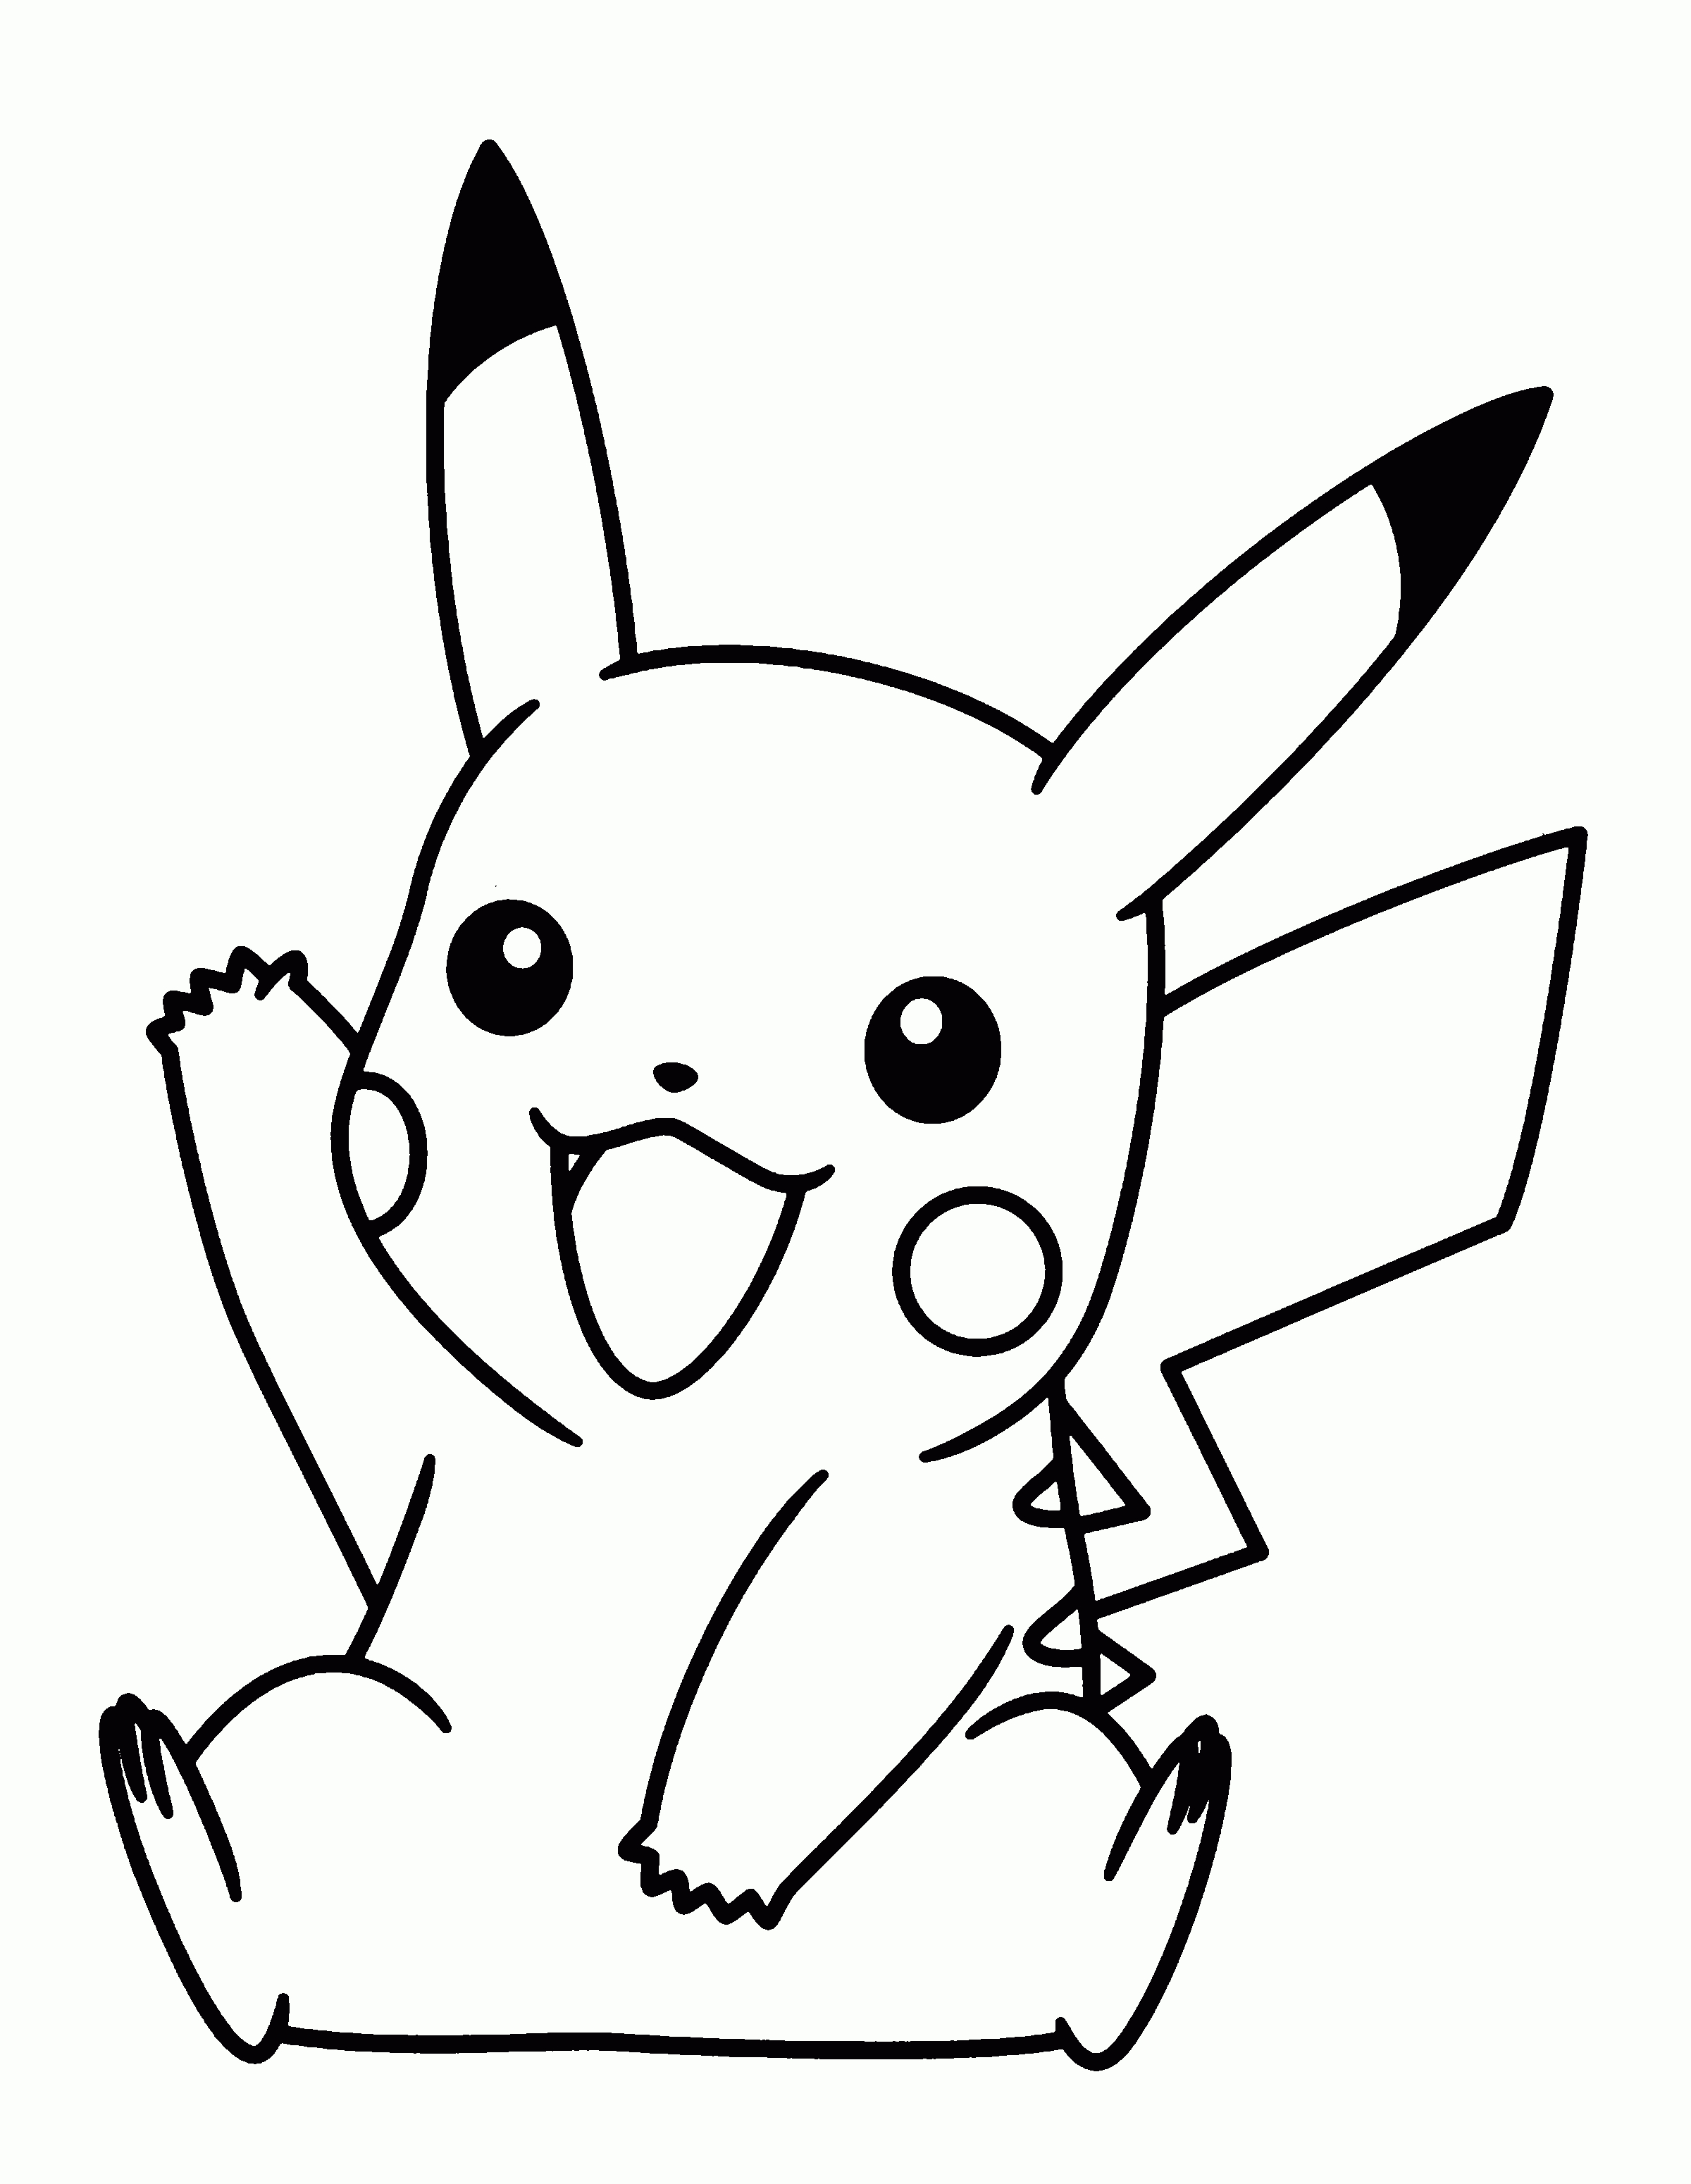 Coloring Pages : Pikachung Pages To Download And Print For Free - Free Printable Pokemon Masks